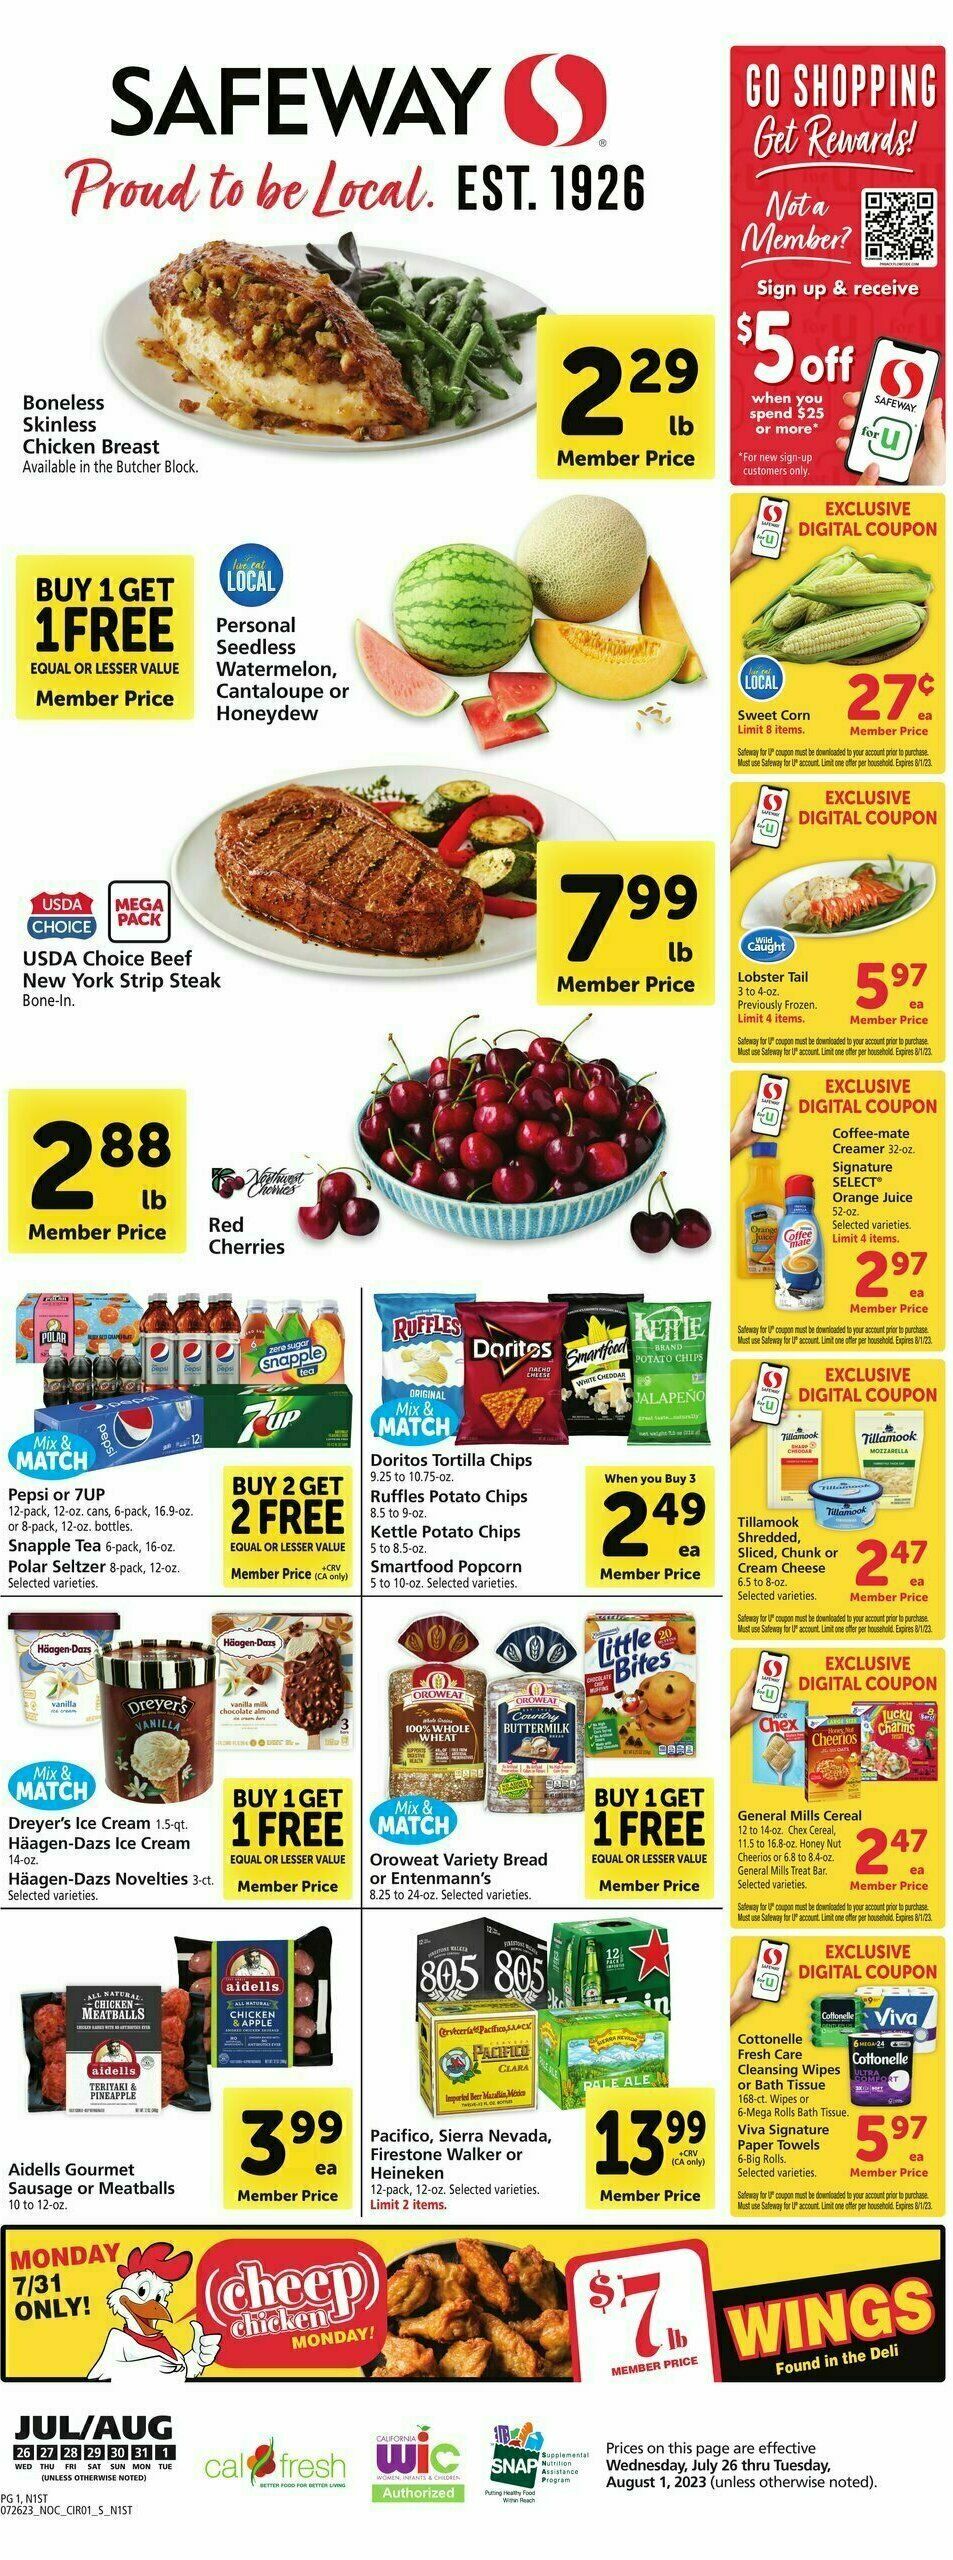 Safeway Weekly Ad from July 26